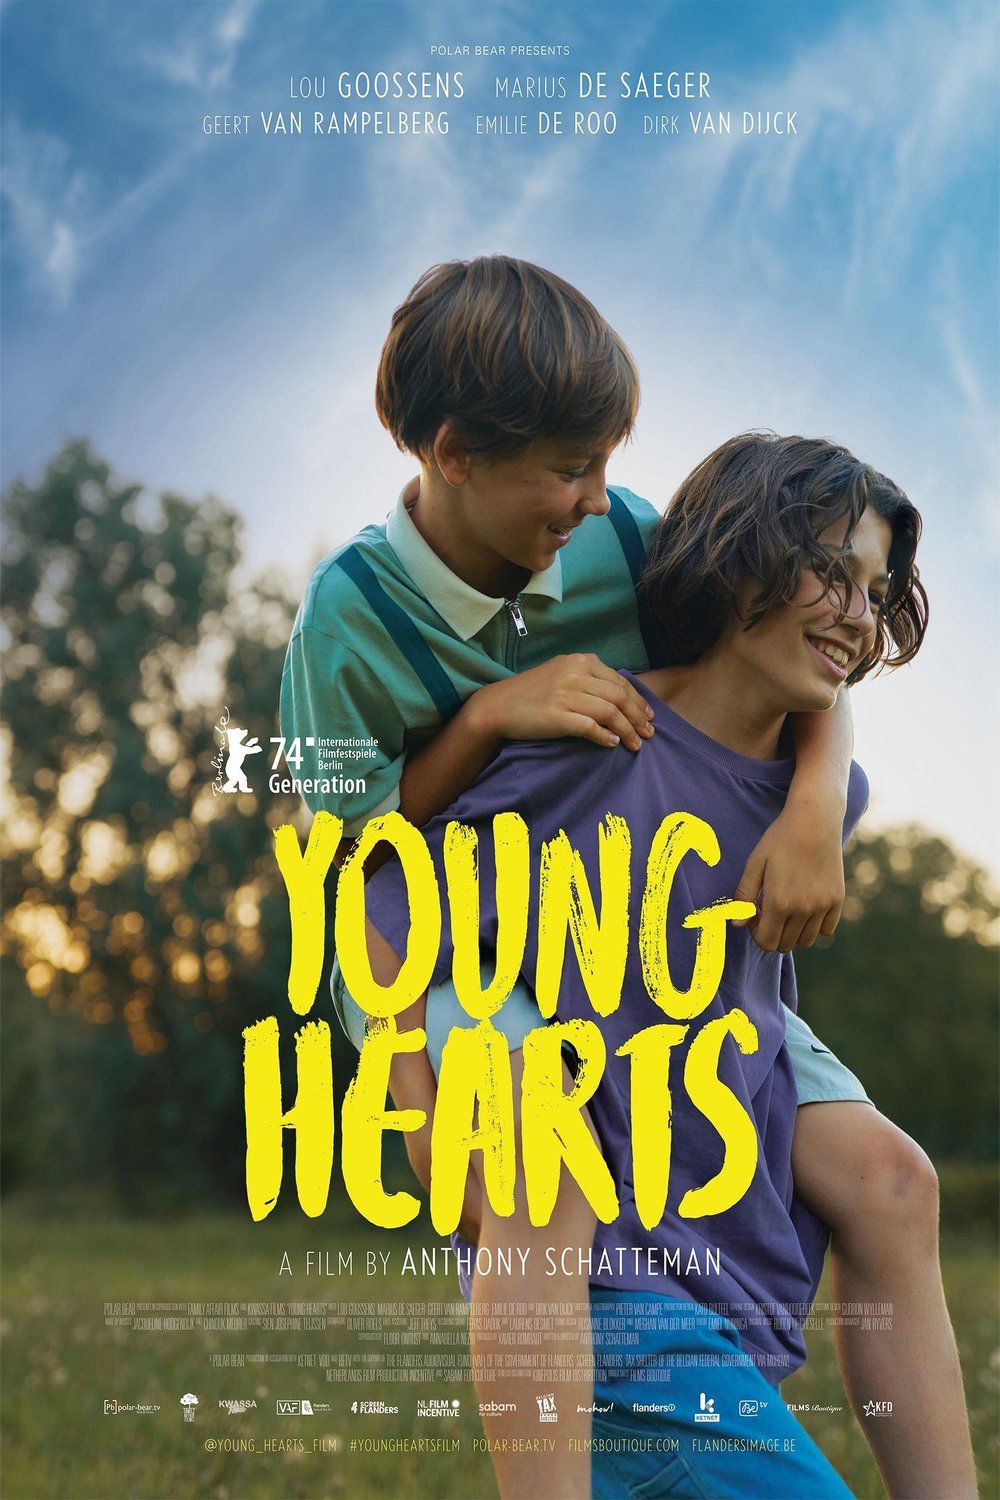 German poster of the movie Young Hearts